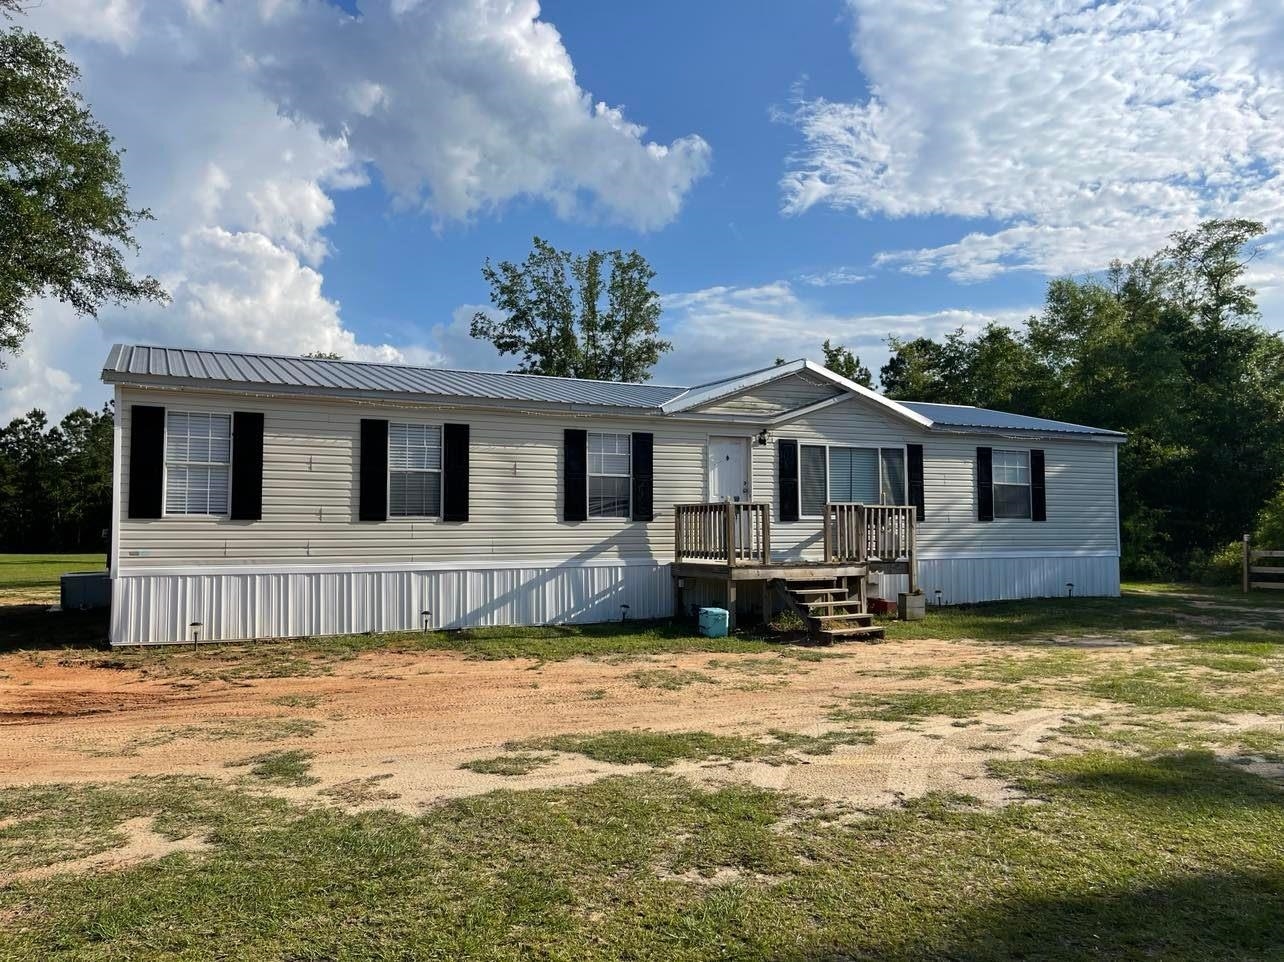 Rare find! Out in the country in Gadsden County! This is 3/2 DW MH - move in ready! New metal roof (2 years) & new septic and well (3 years), home is fairly new (2019).  2.06 acres, move in ready!